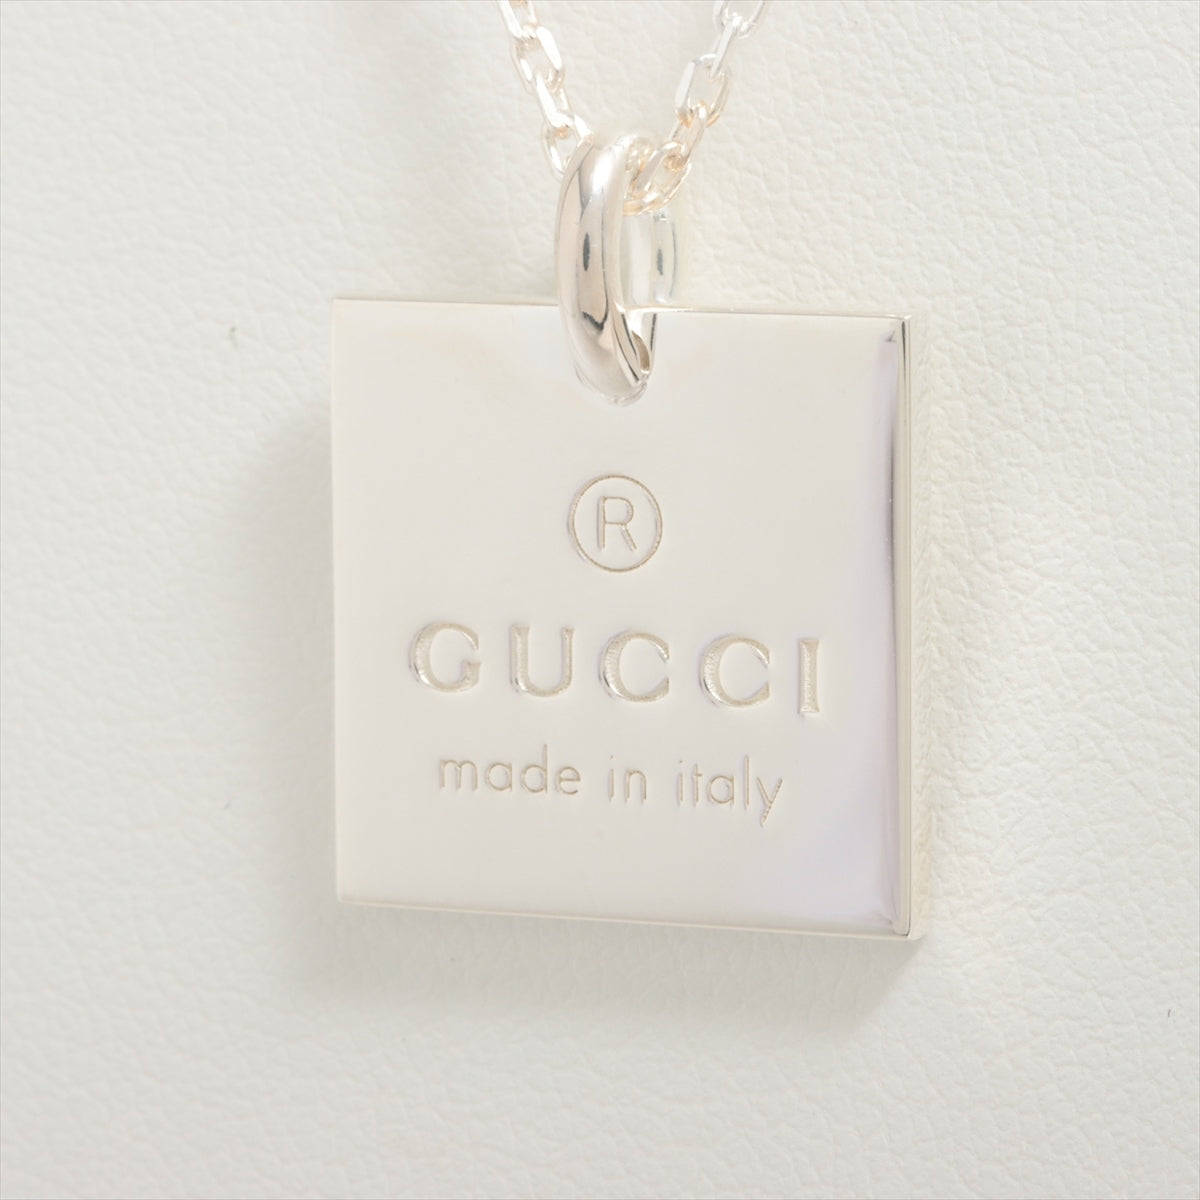 Gucci logo plate Necklace 925 10.7g Silver